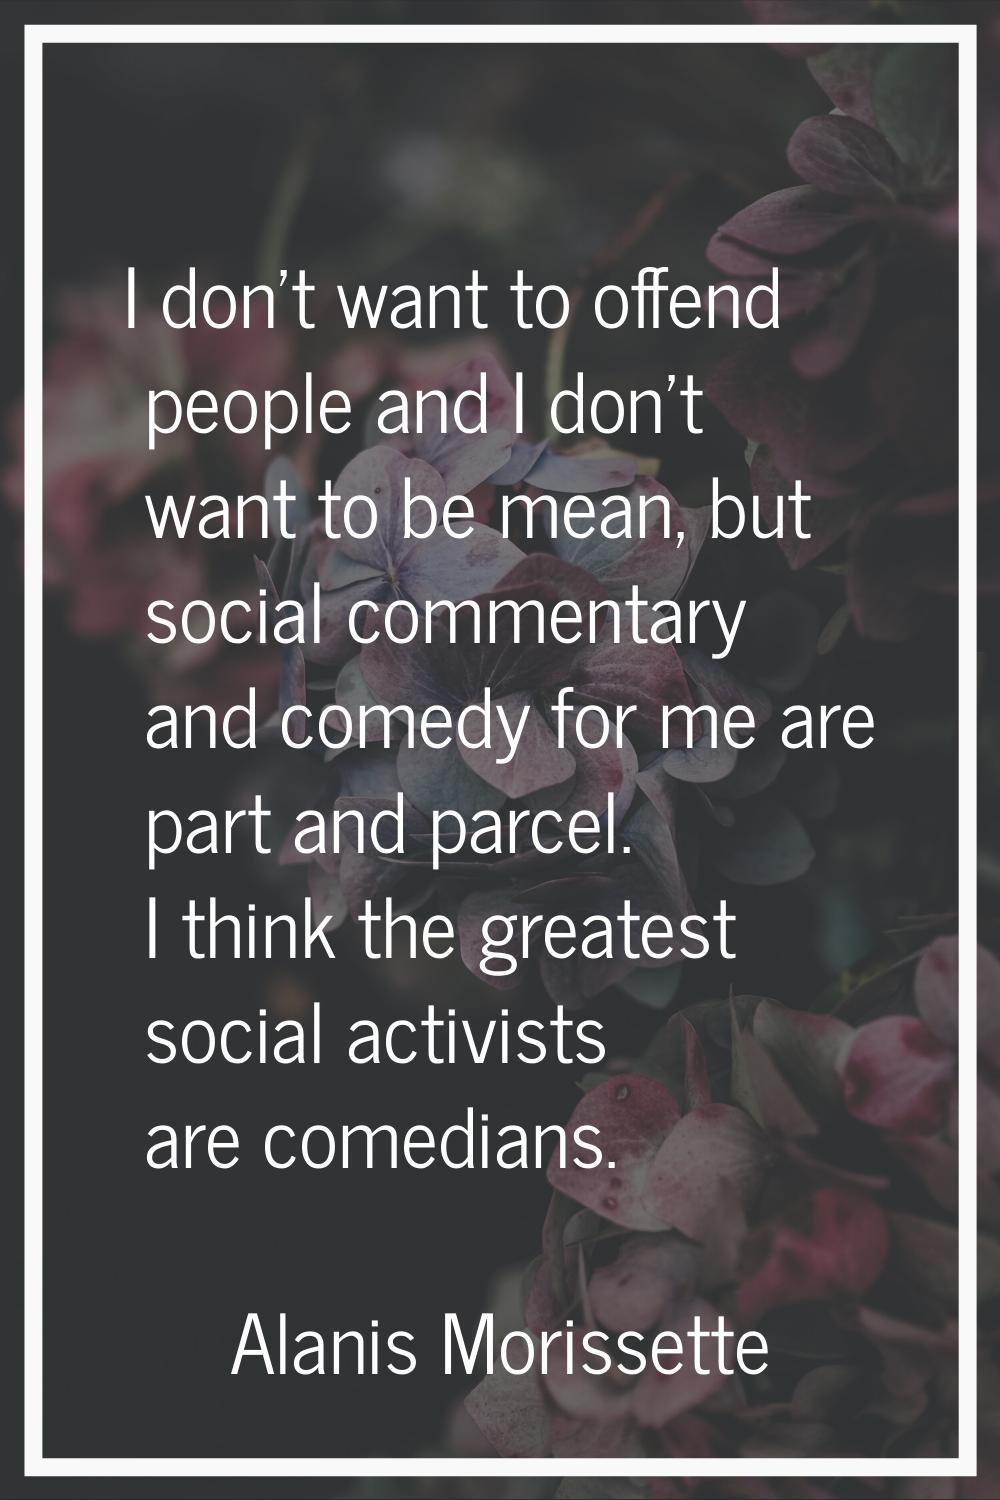 I don't want to offend people and I don't want to be mean, but social commentary and comedy for me 